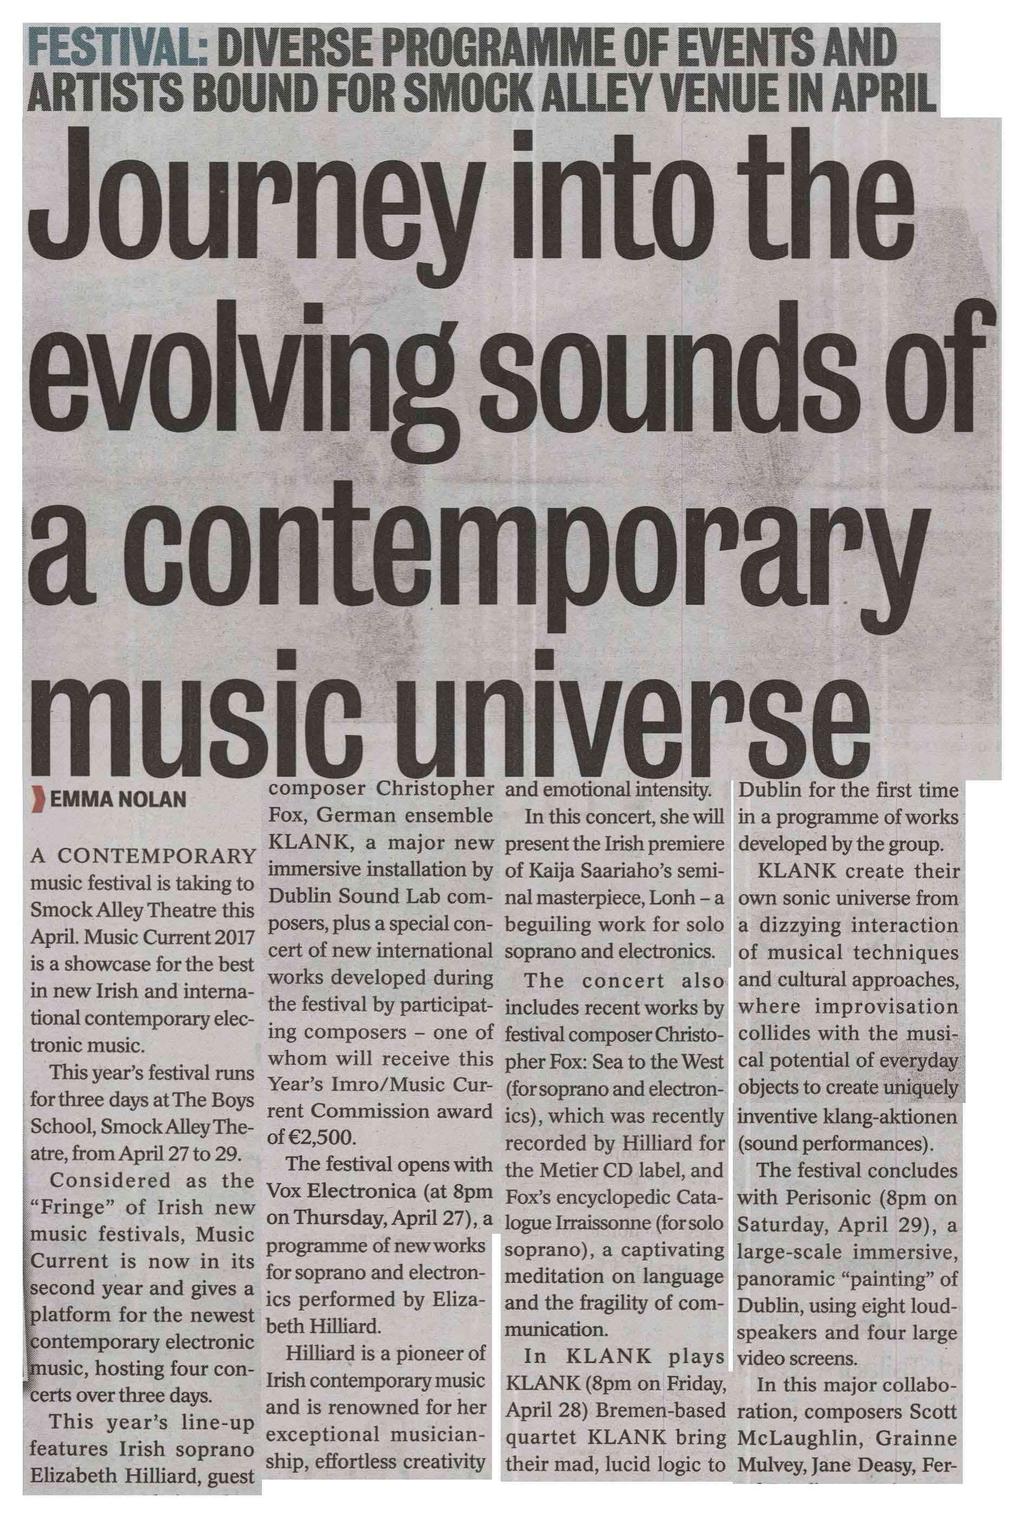 Lucan Gazette* -21- Area of Clip: 78500mm² Page 1 of 3 FESTIVAL DIVERSE PROGRAMME OF EVENTS AND ARTISTS BOUND FOR SMOCK ALLEY VENUE IN APRIL Journey into the evolving sounds of a contemporary music